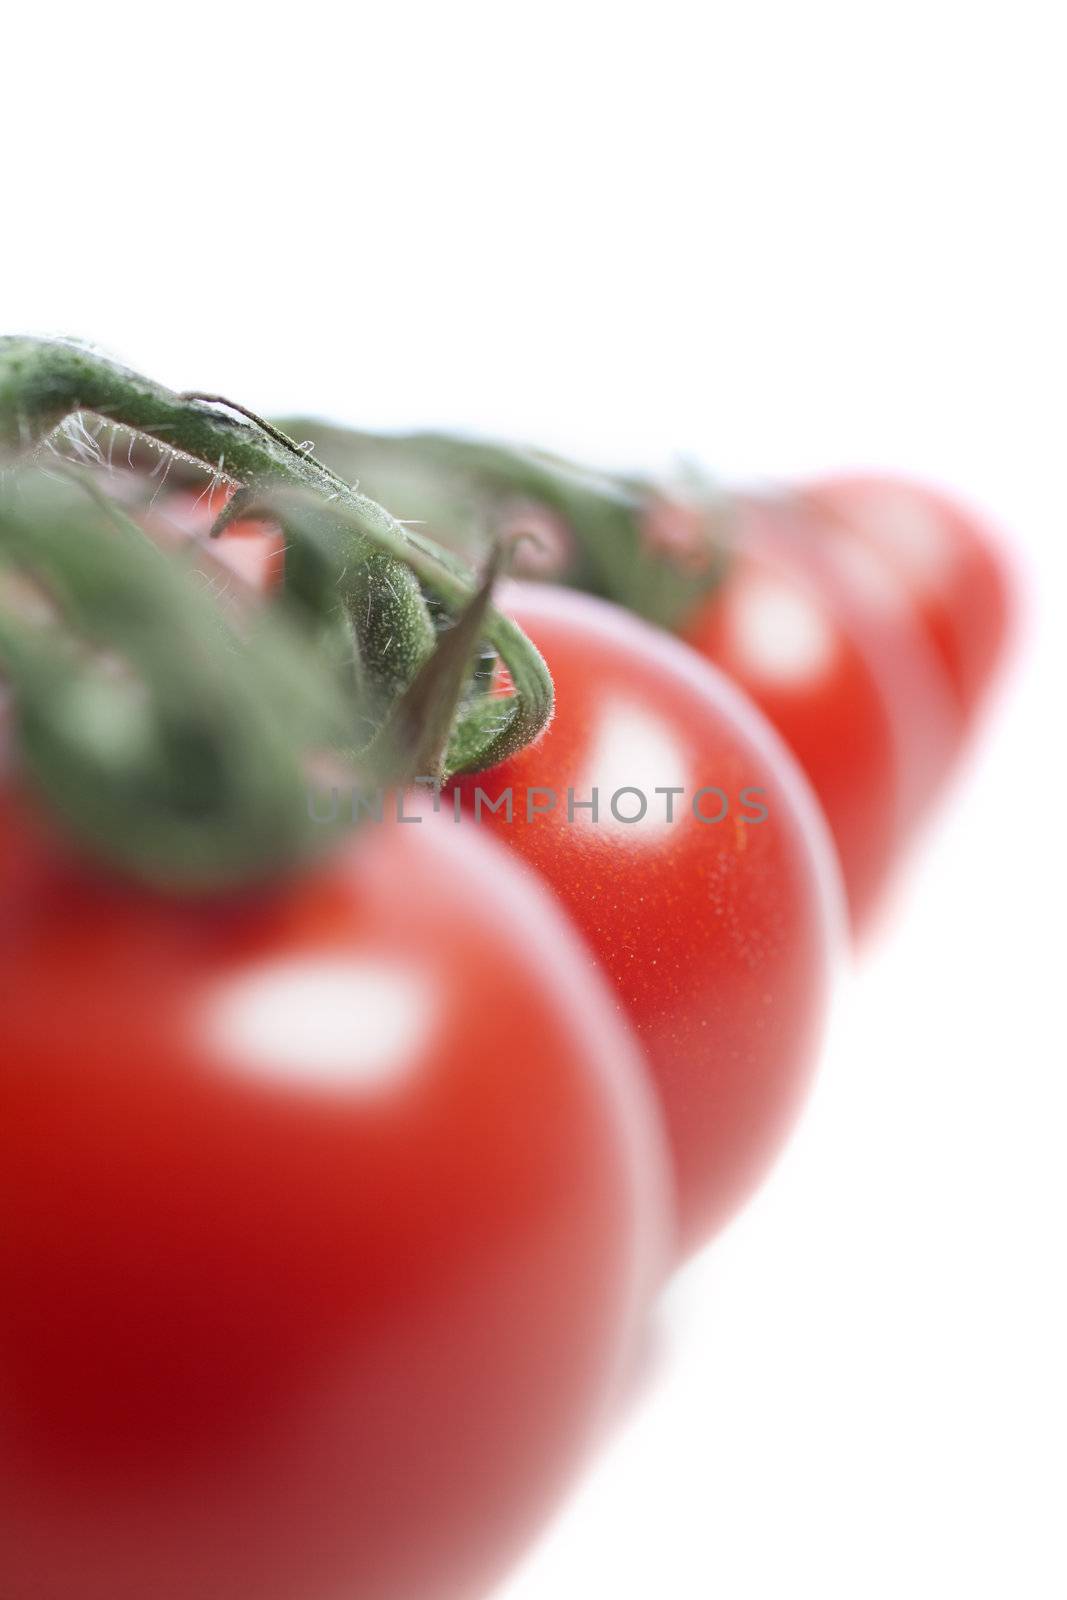 Fresh ripe tomatoes on the vine isolated on white background